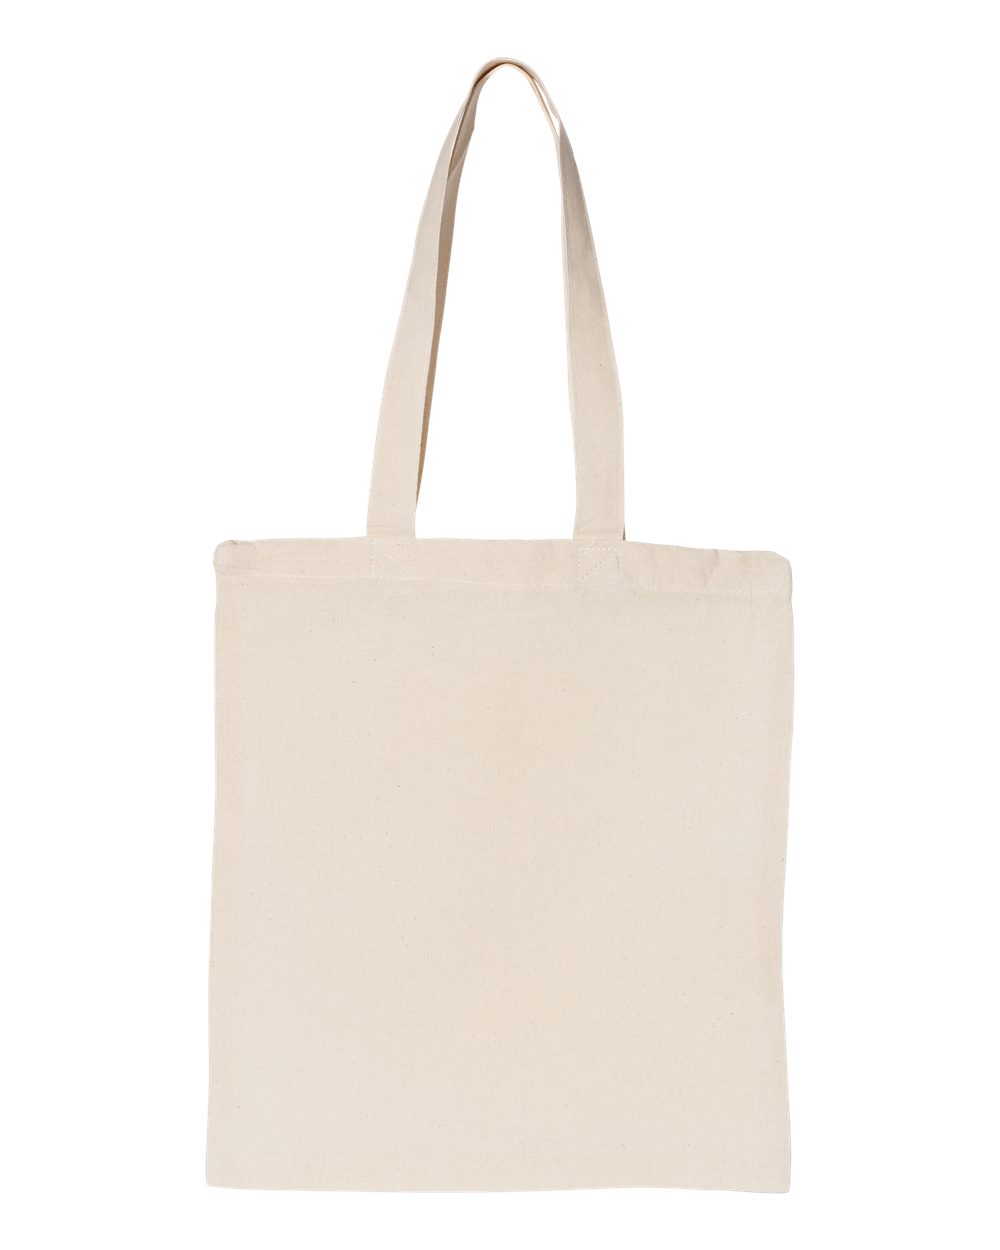 OAD Large Canvas Tote